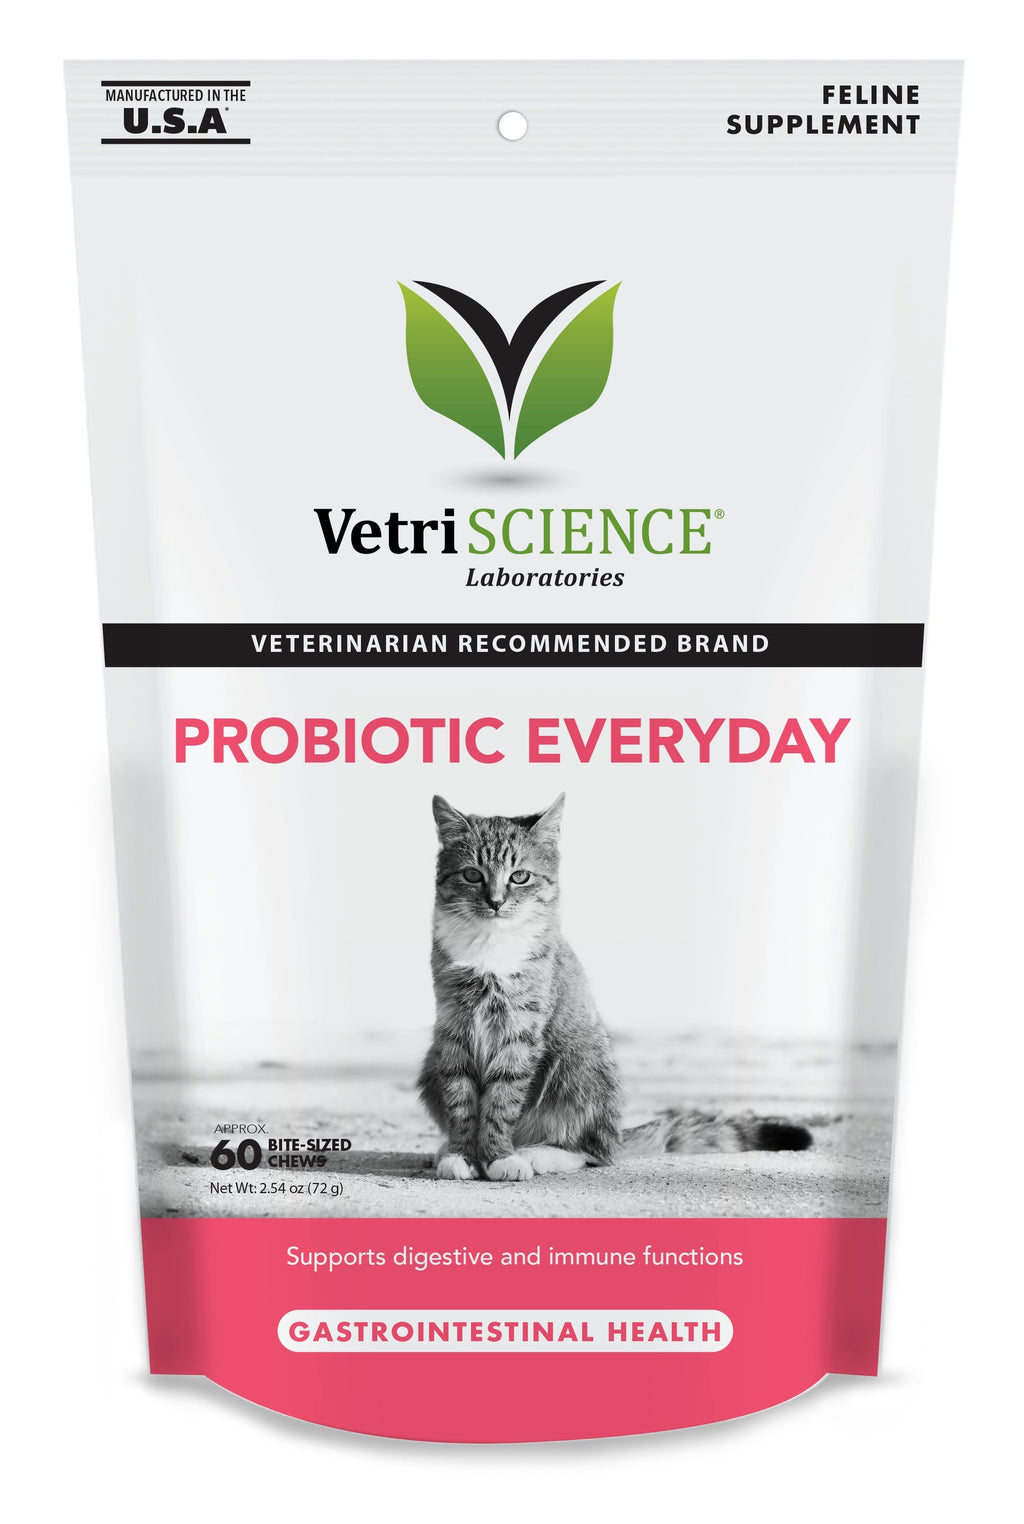 Vetriscience Labs Probiotic Digestive-Aid Health Chewable Cat Supplements - 30 ct Pouch  